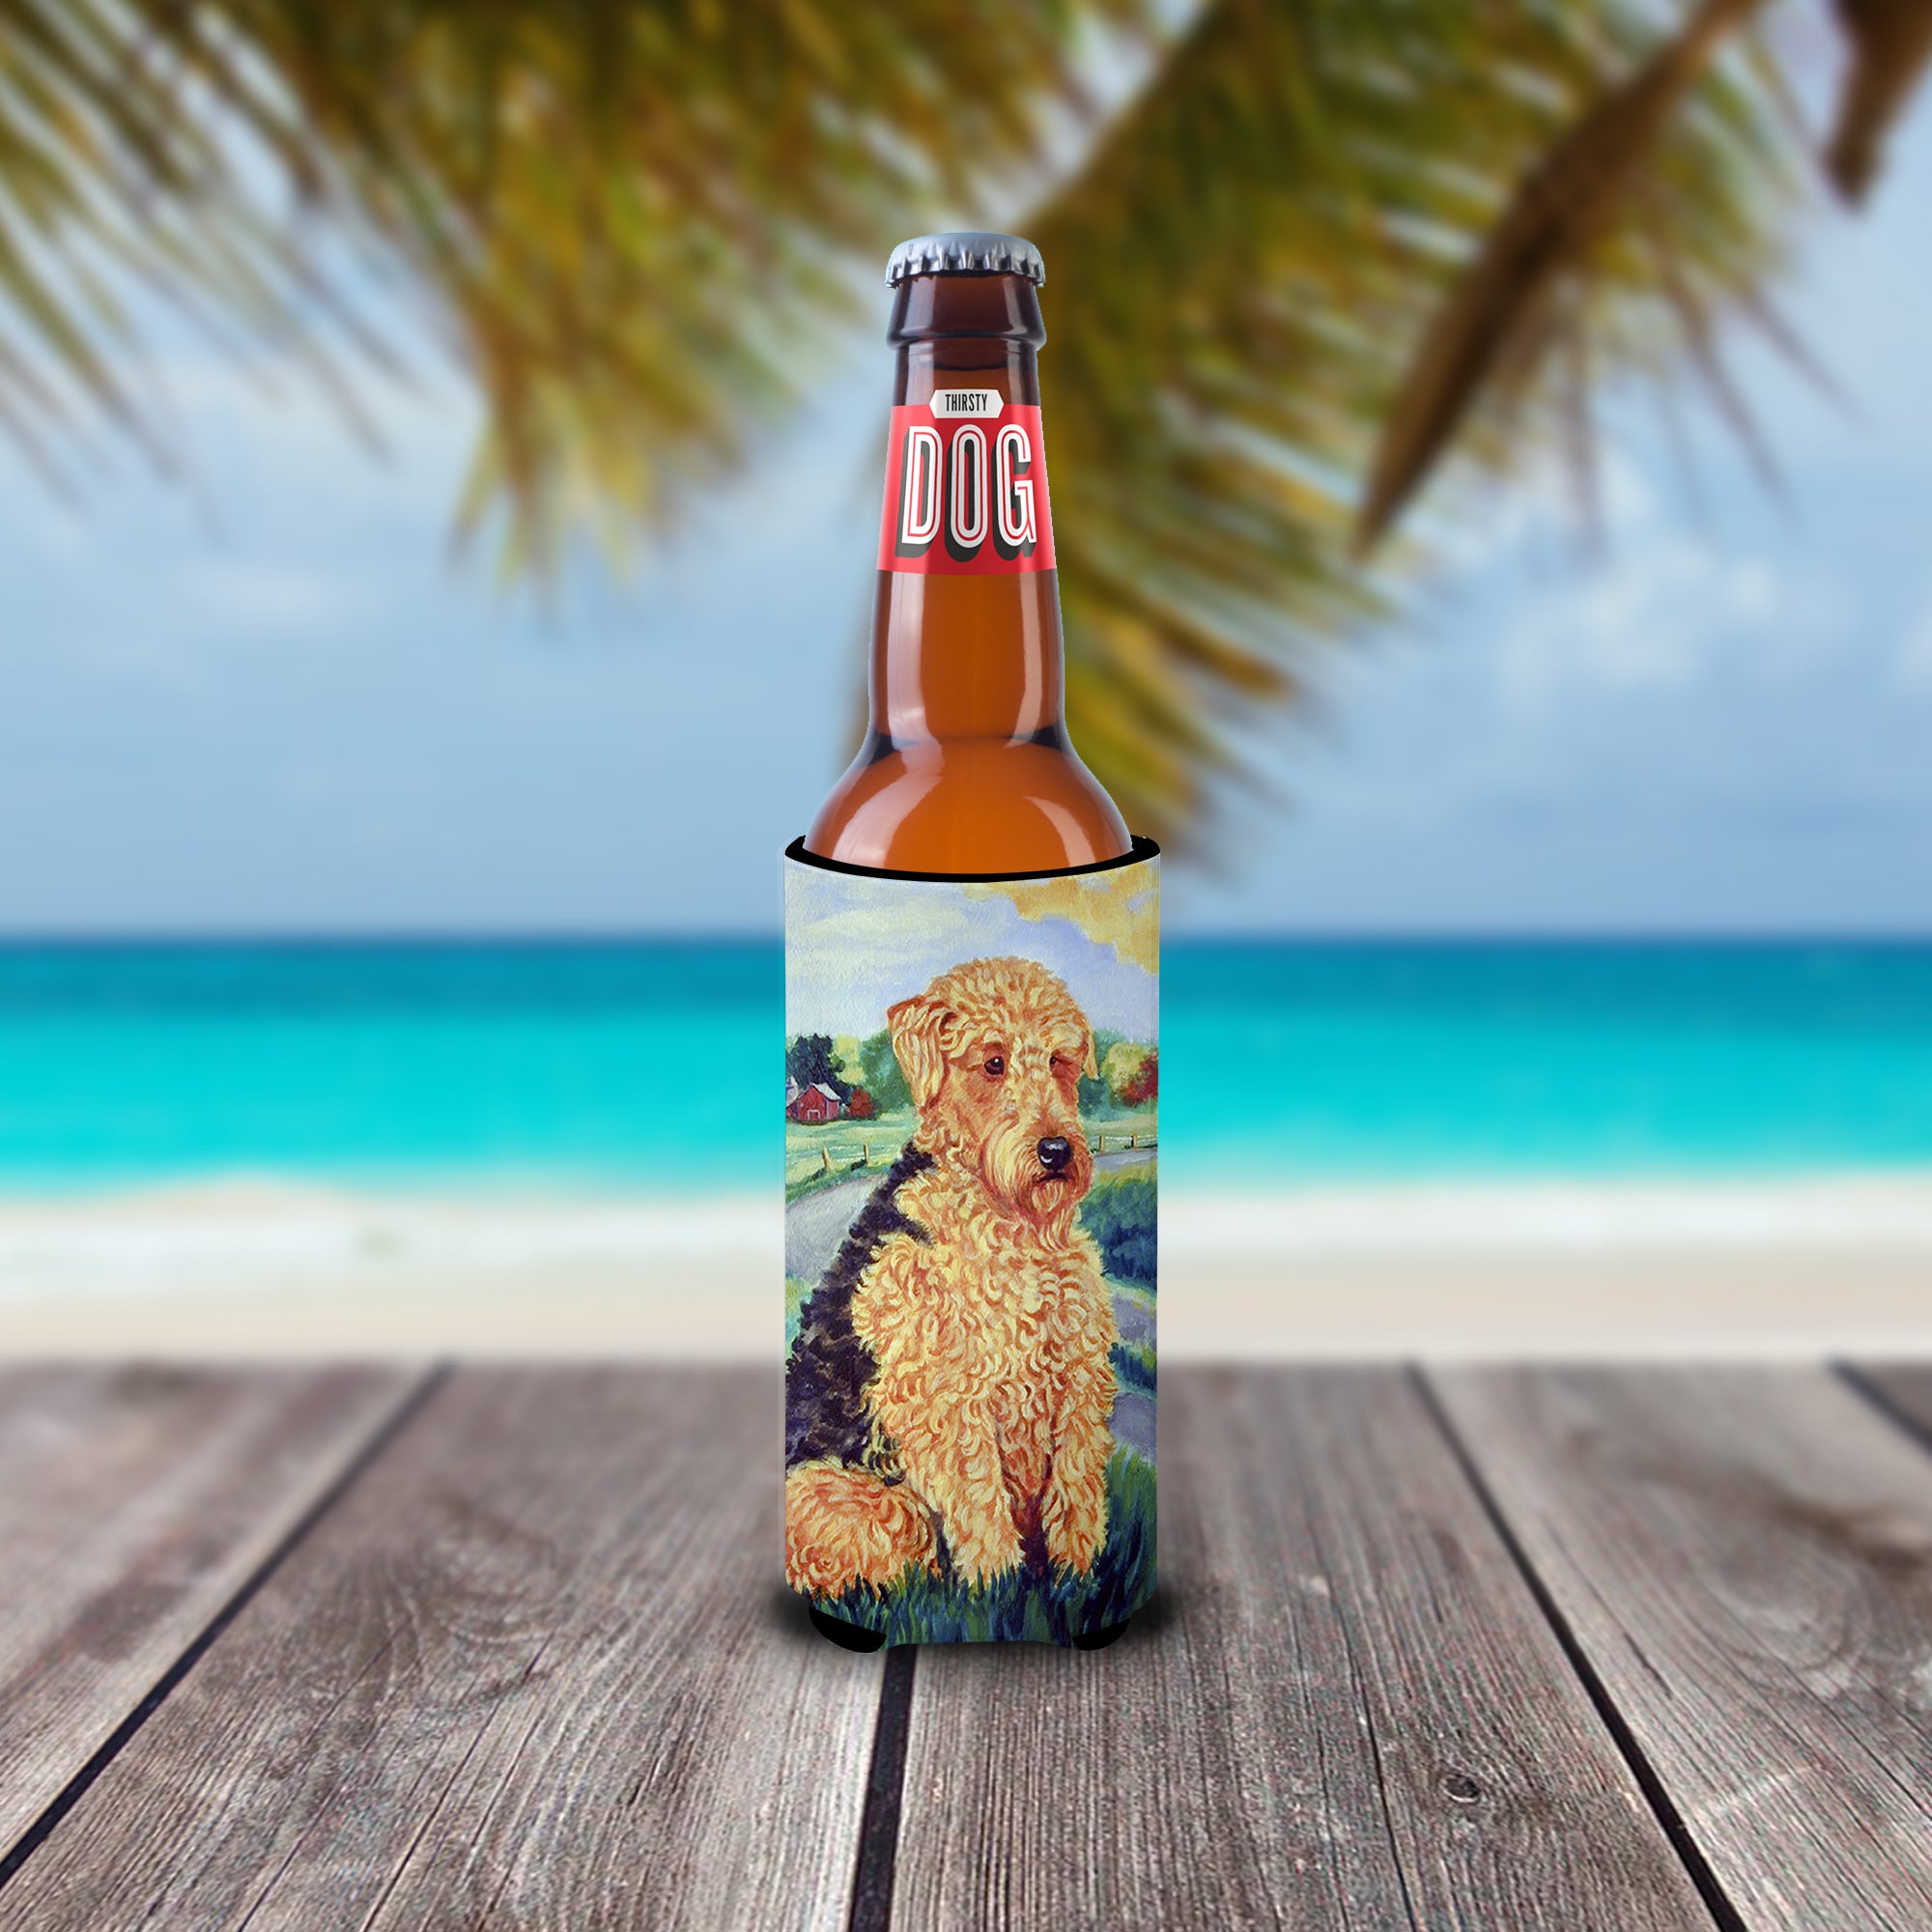 Airedale Terrier Ultra Beverage Insulators for slim cans 7096MUK